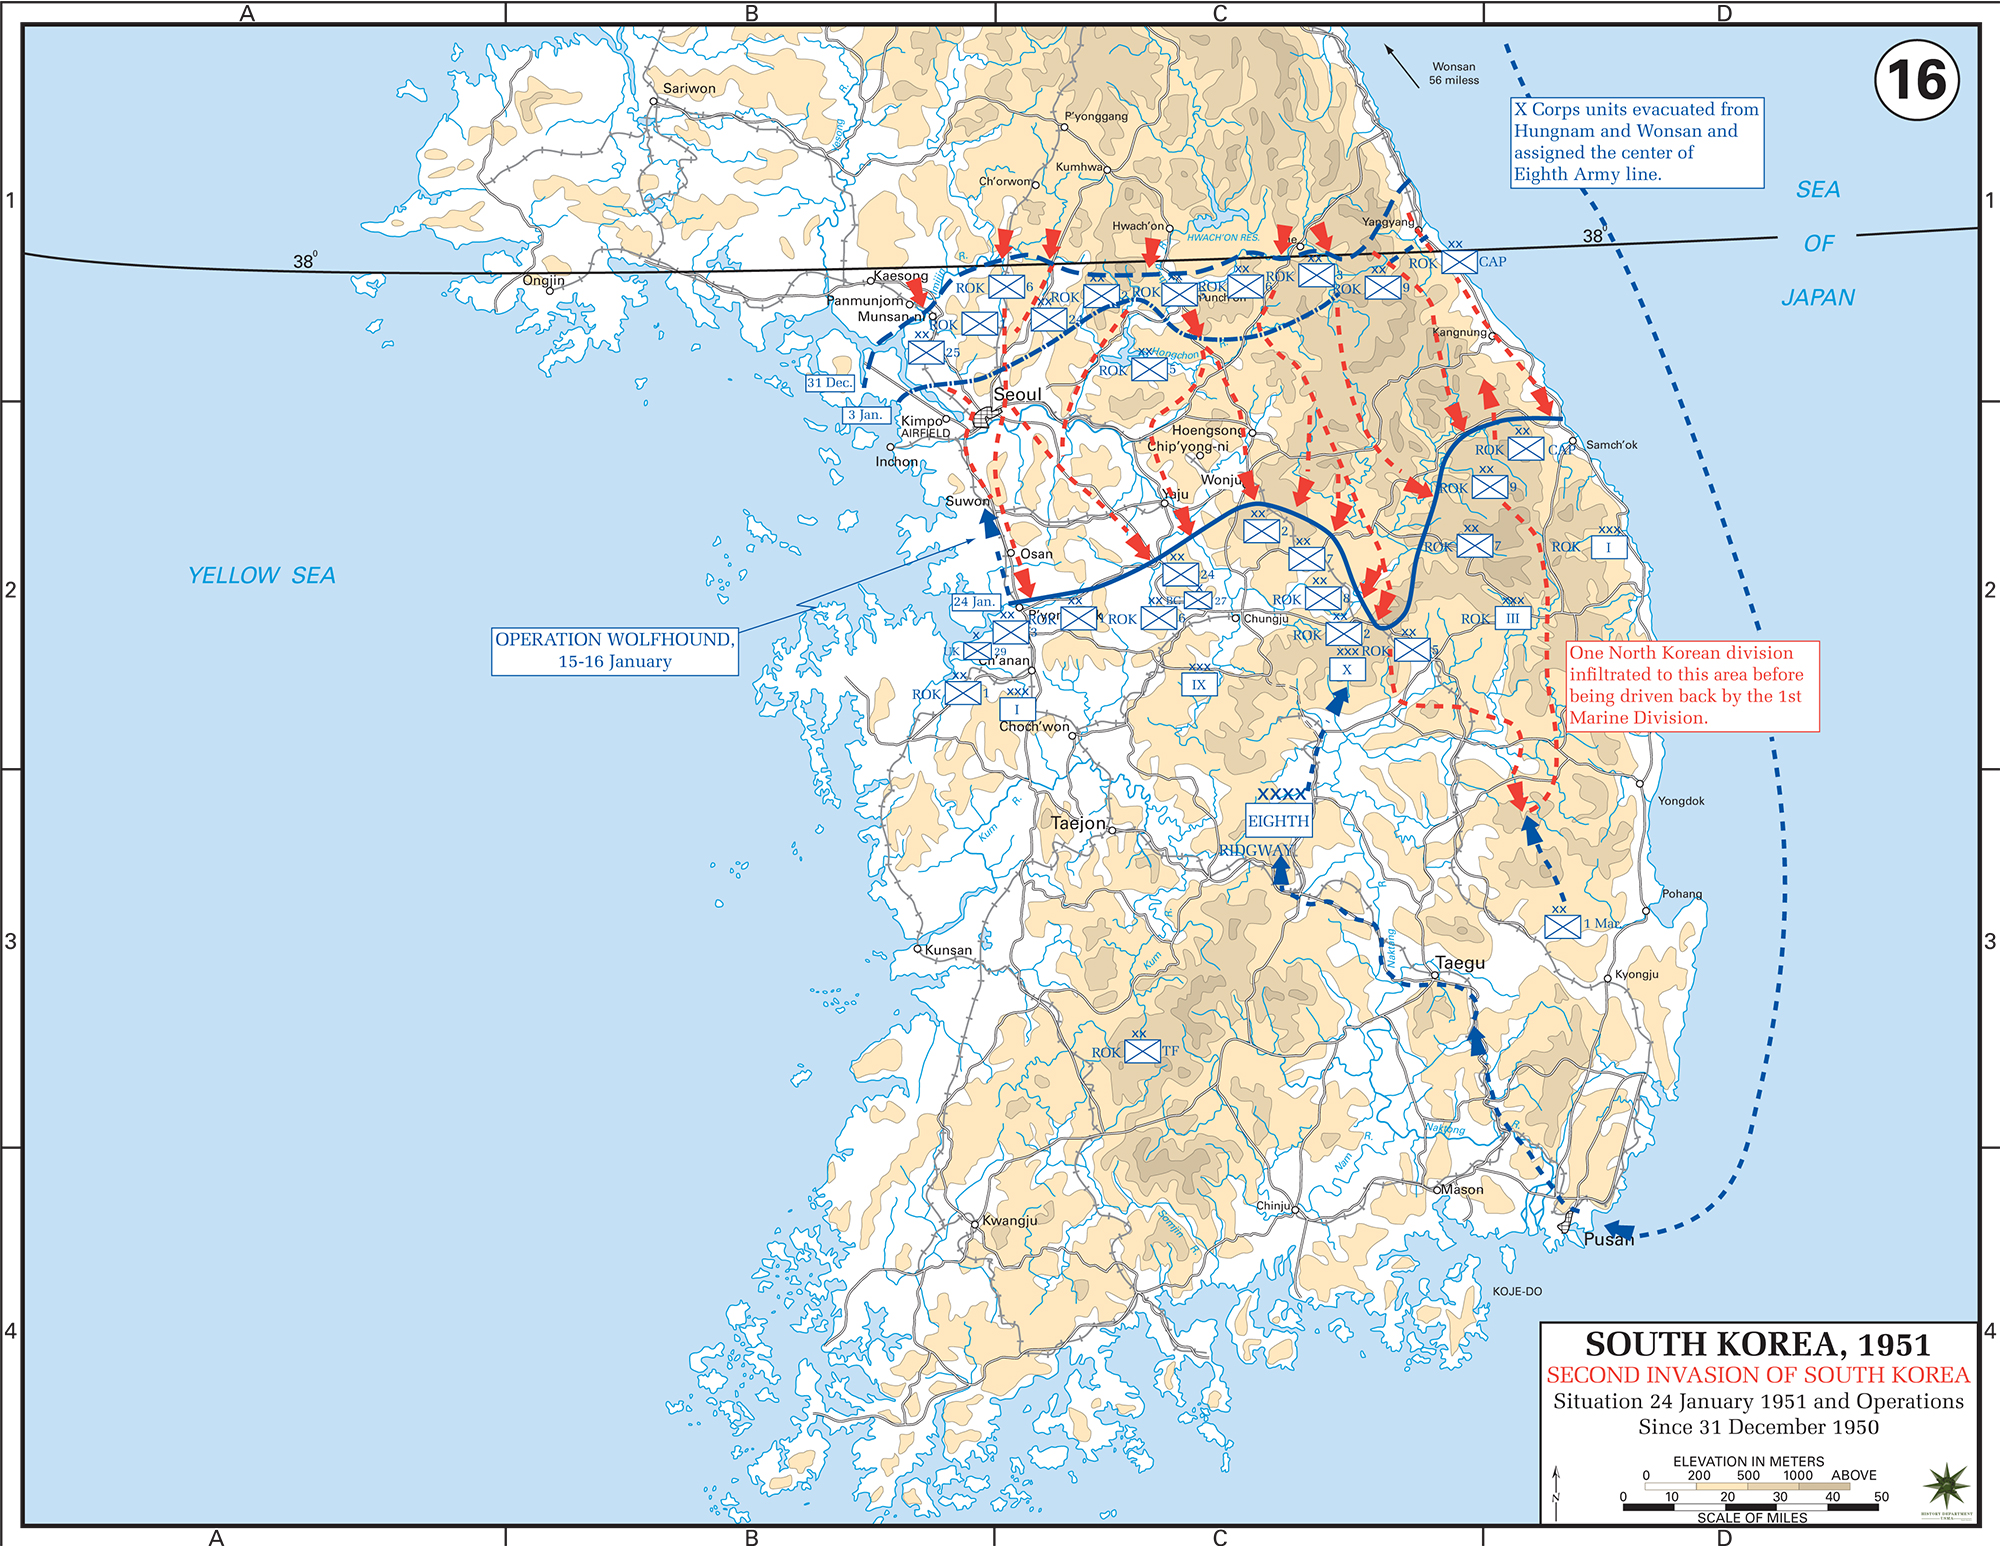 Map of the Korean War: South Korea. Second Invasion of South Korea, Situation January 24, 1951, Operations Since December 31, 1950.